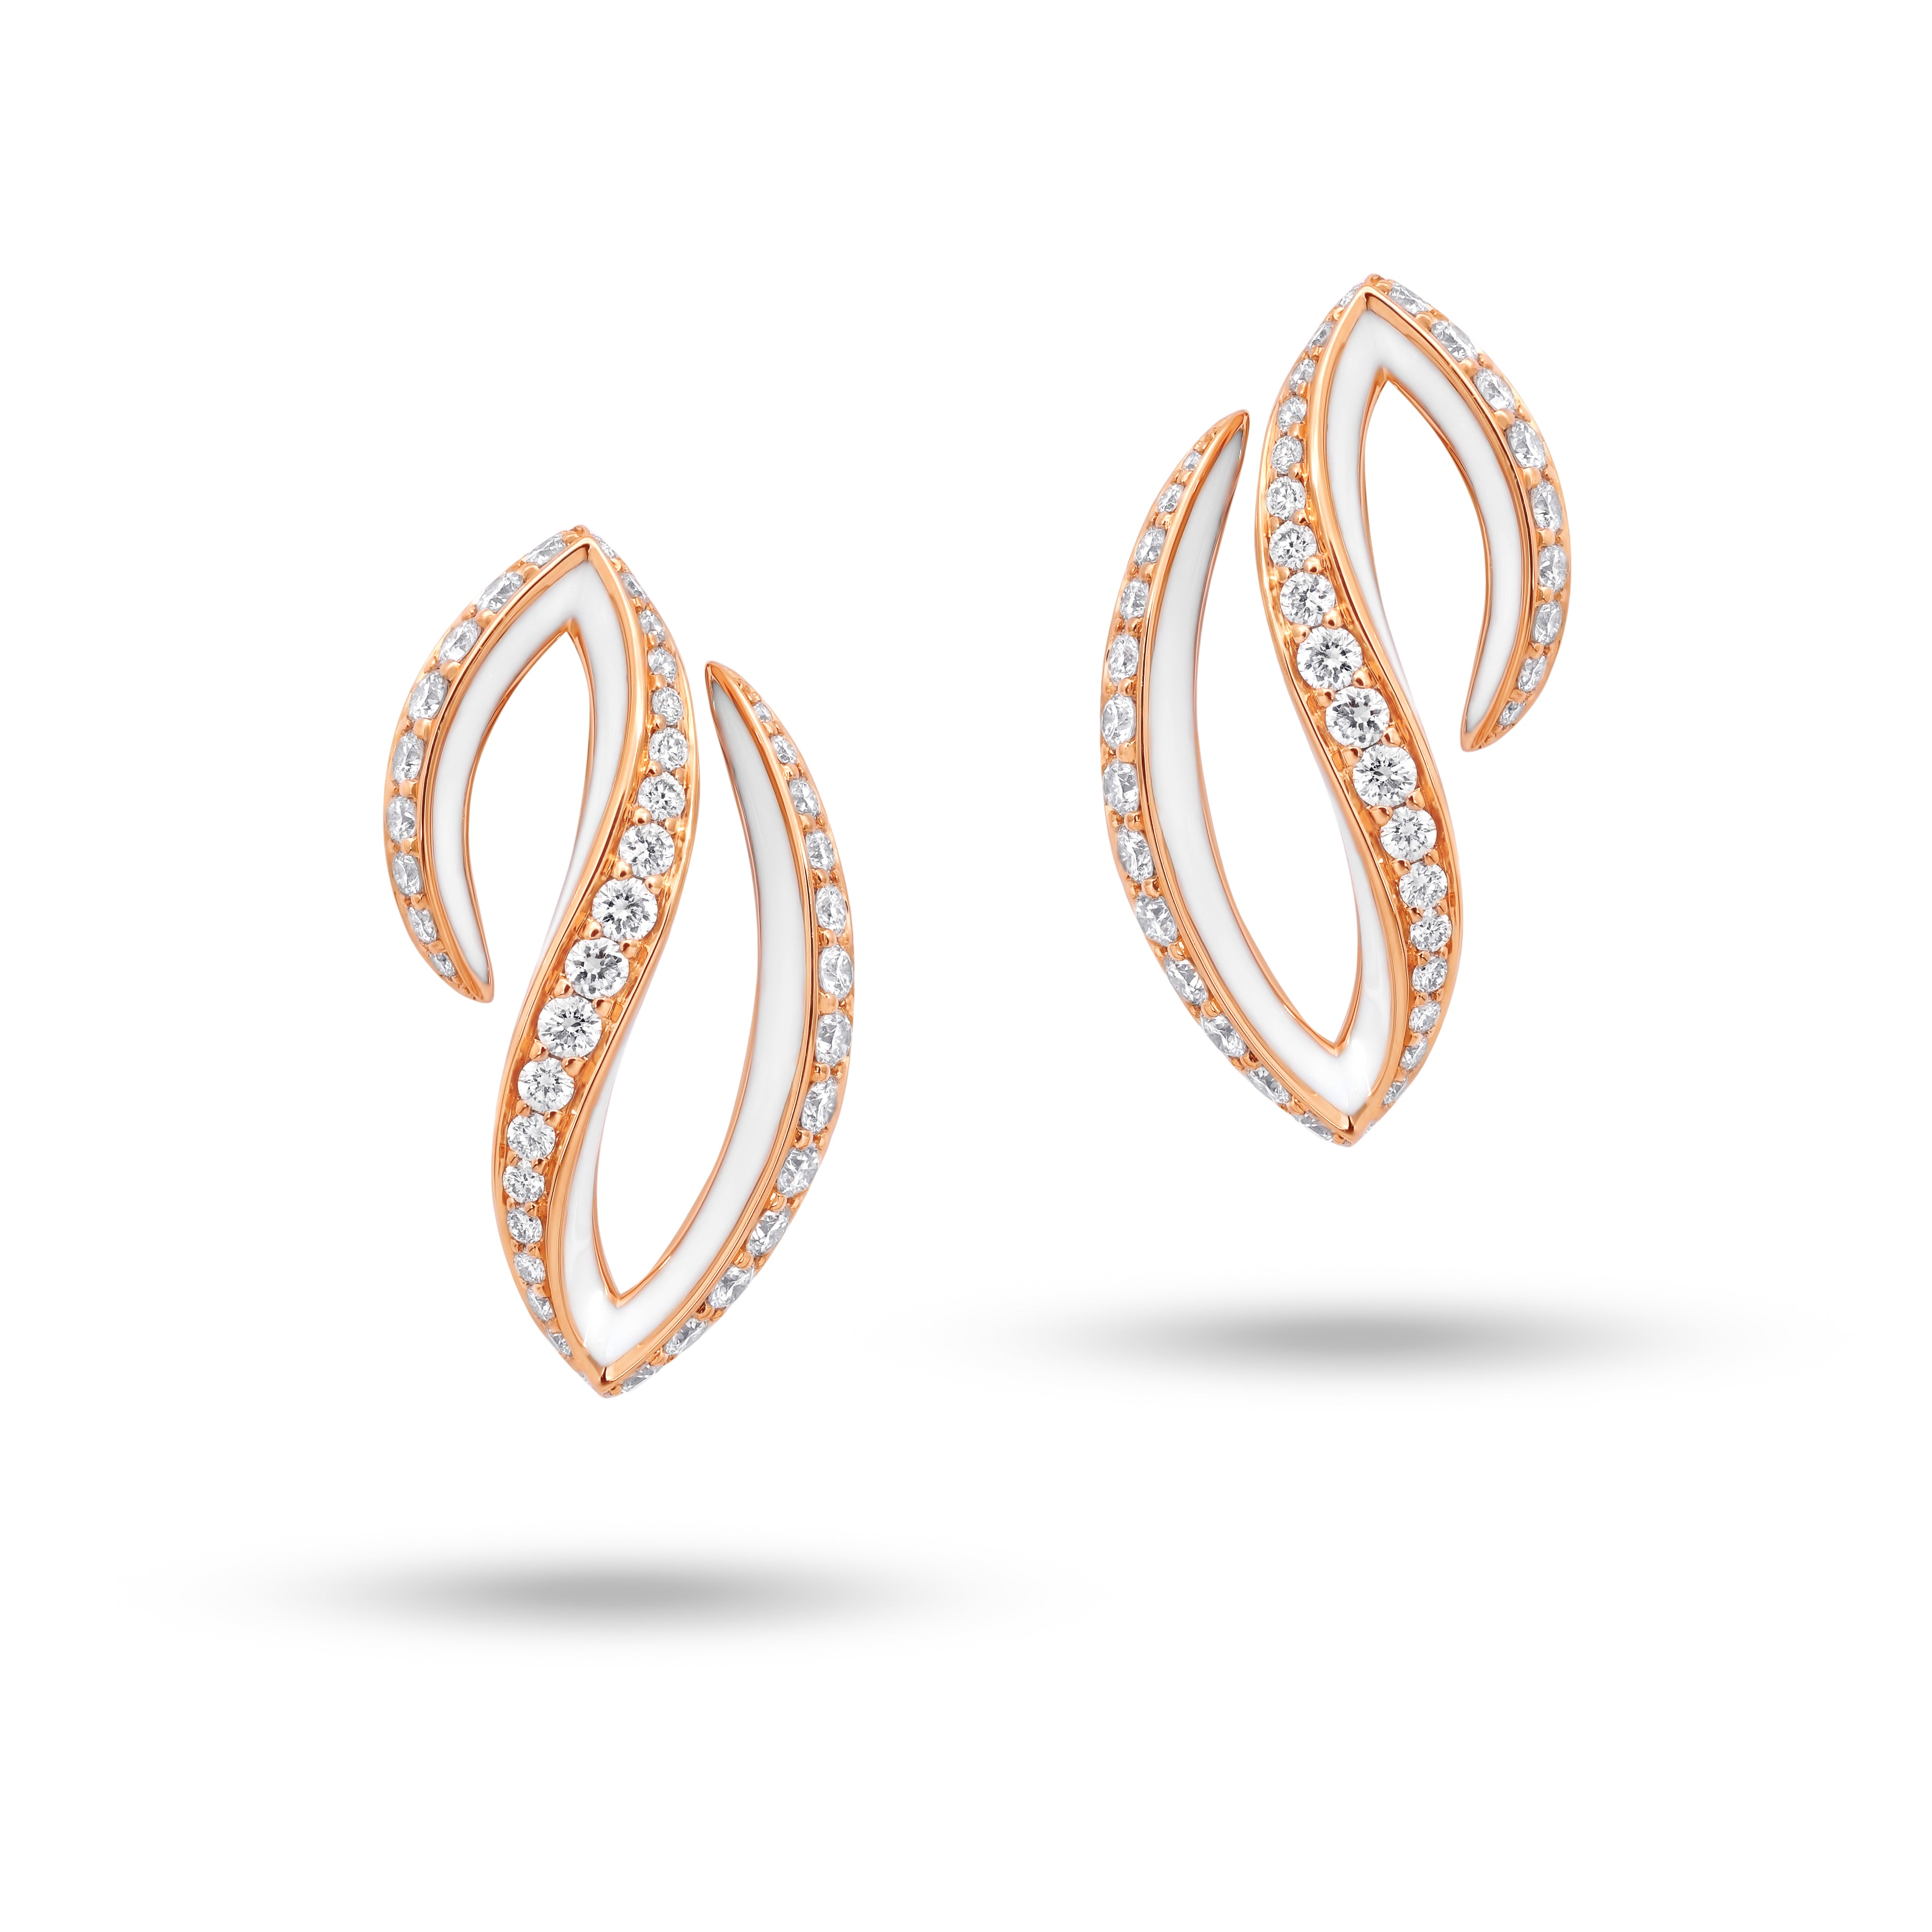 VIVA small Curved Earrings with Diamonds and White Enamel